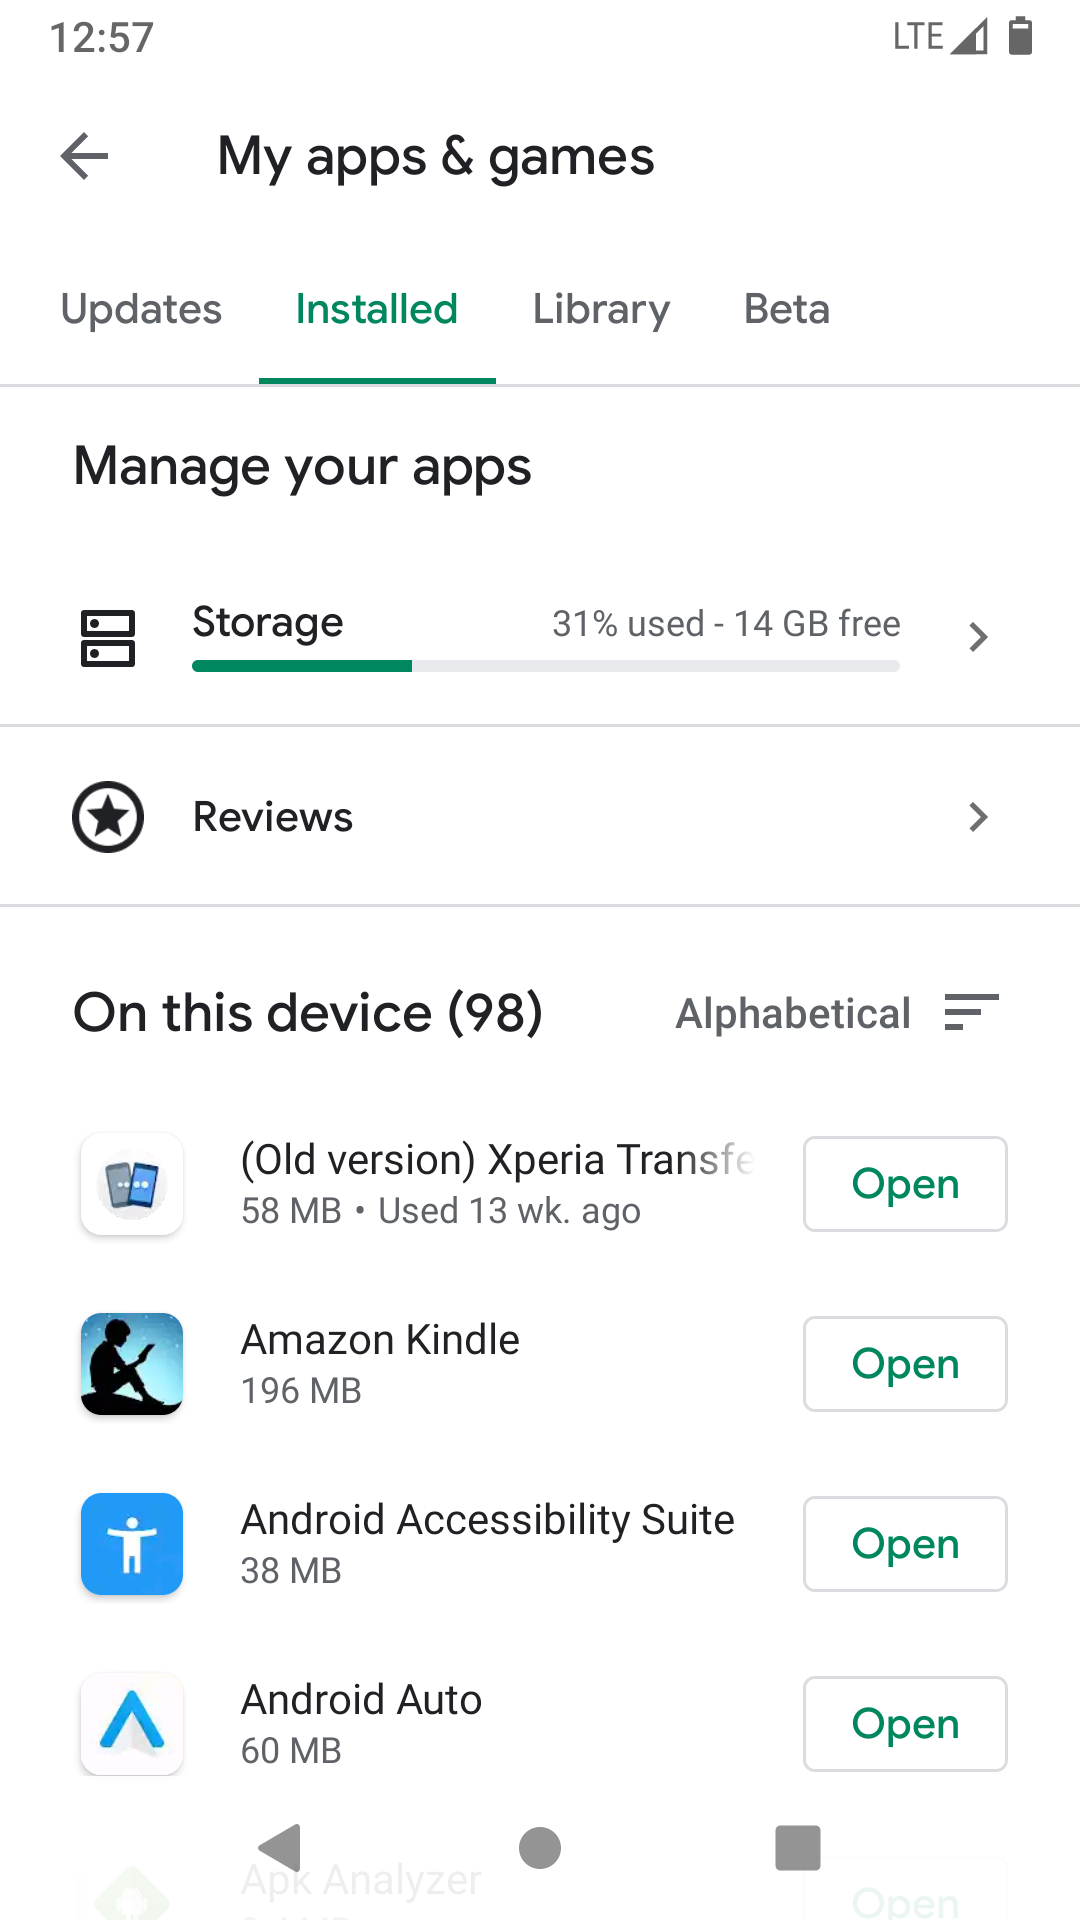 This screenshot shows 31% use of storage after loading my apps.